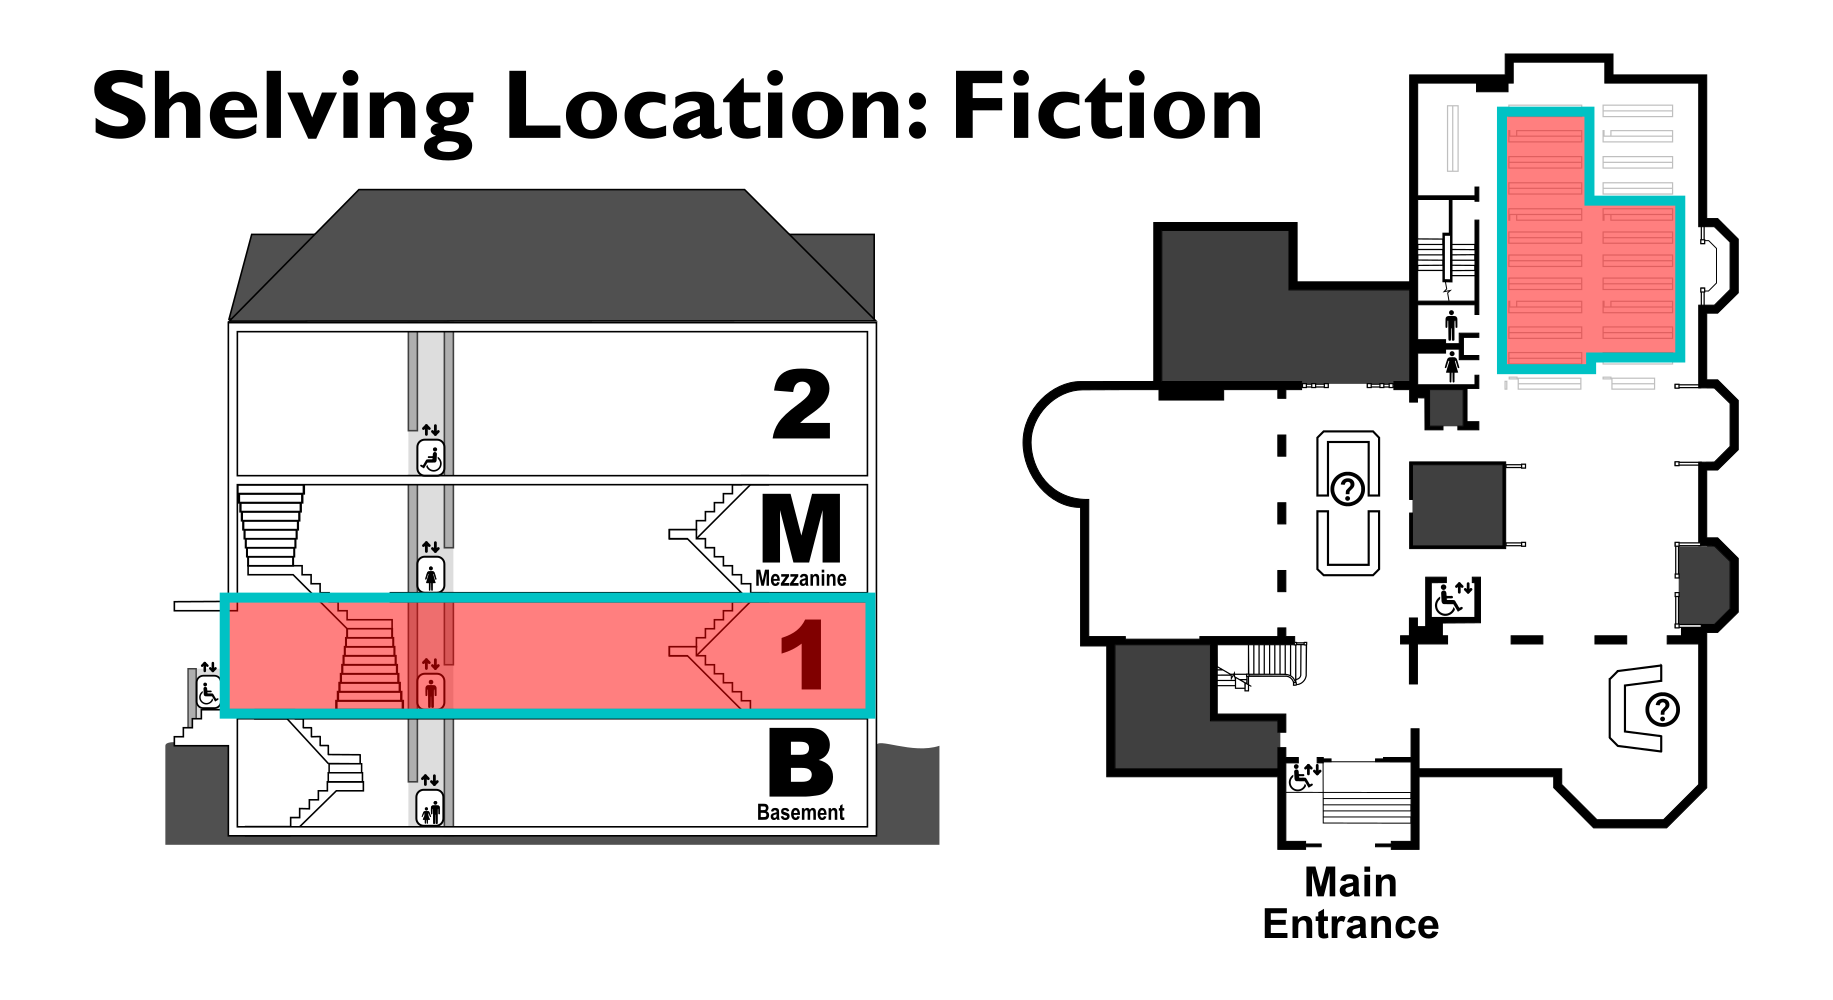 map showing location of Fiction